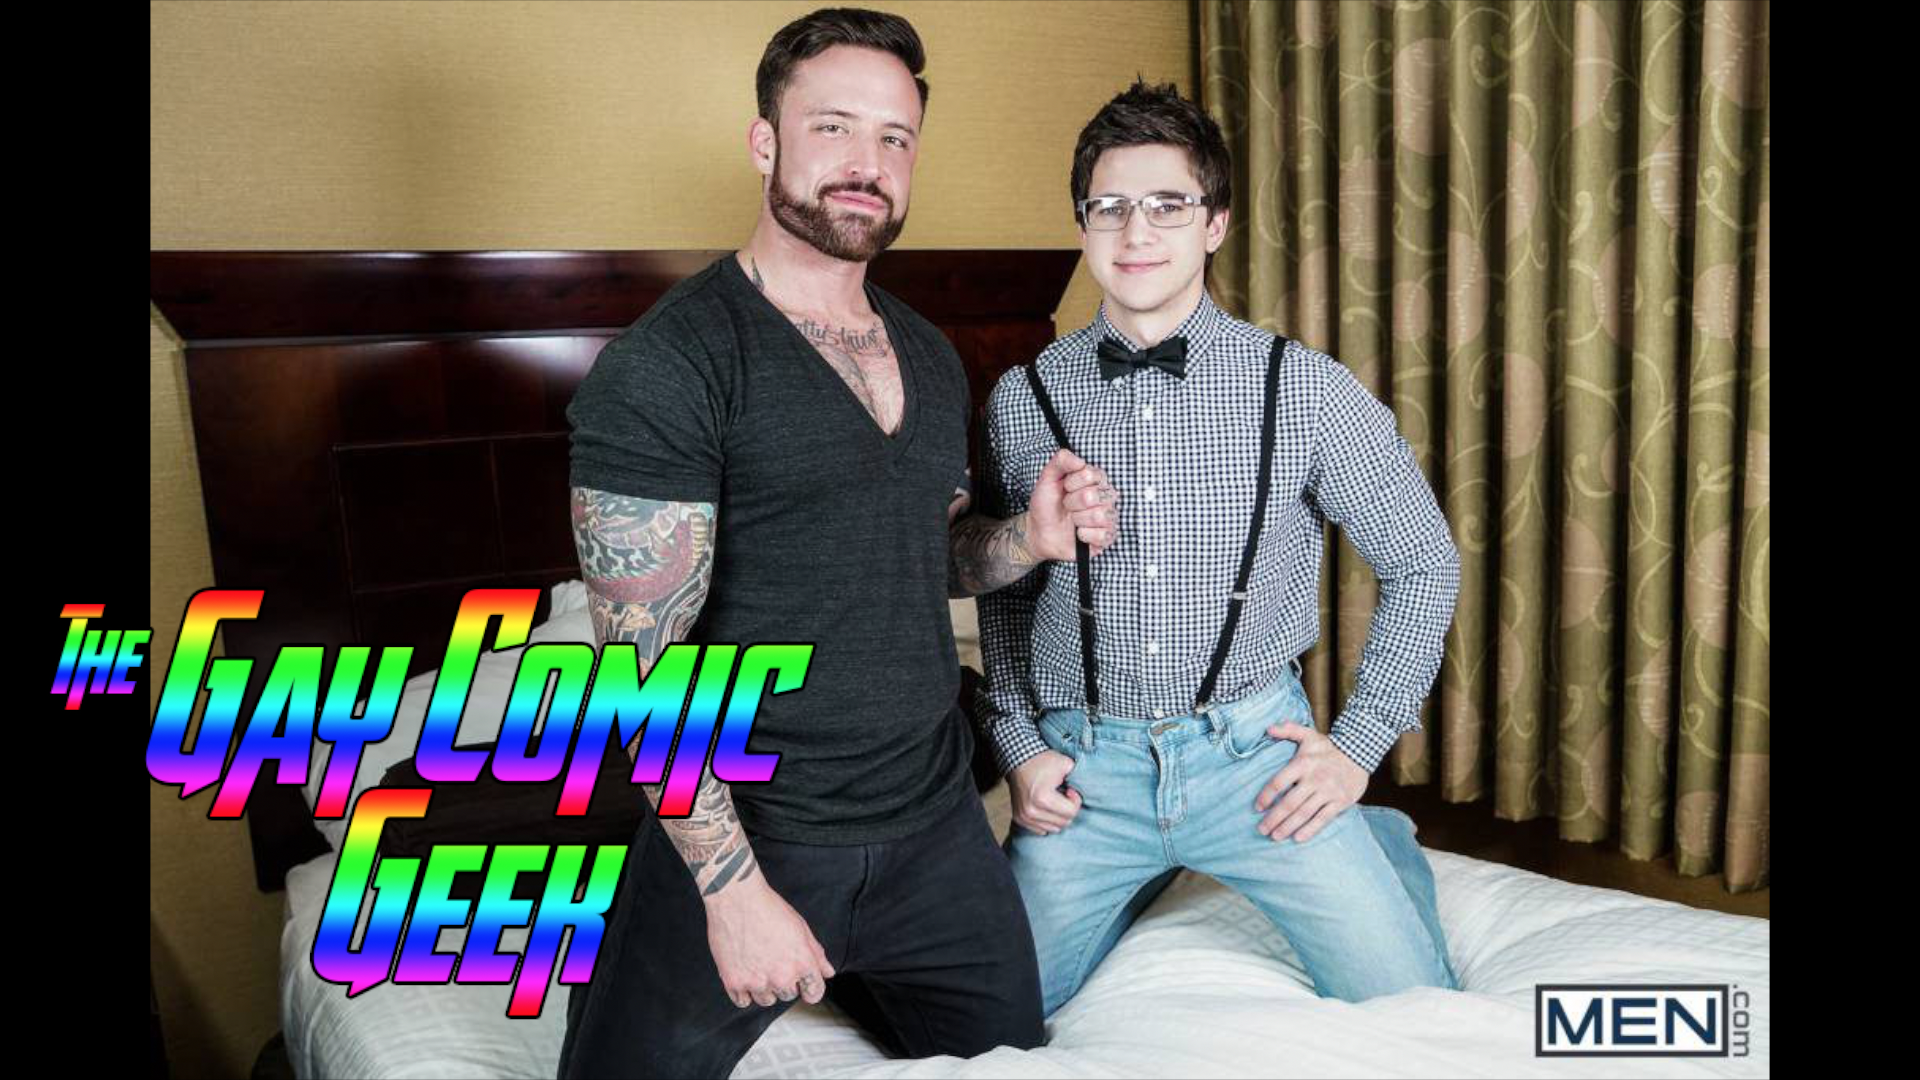 Gay Geek Porn - The Nerd and the Escort â€“ UNCUT Scene Review from Men.com (NSFW)